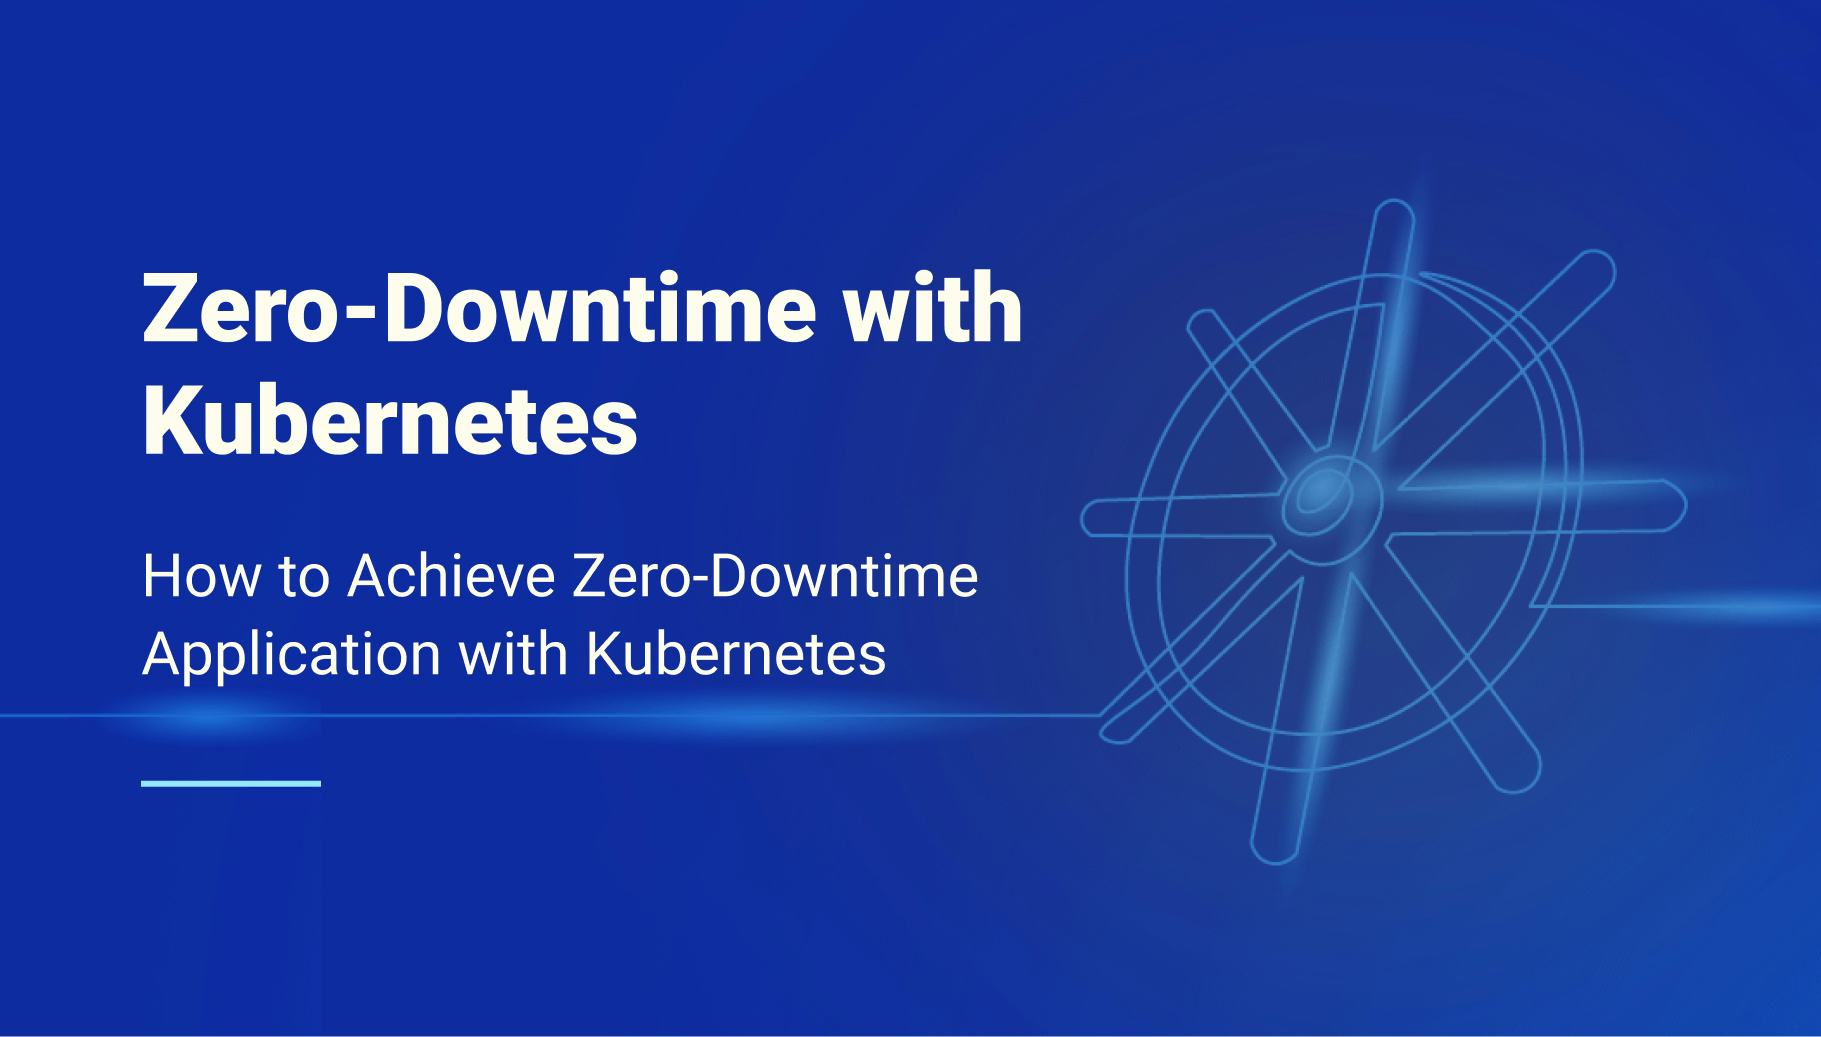 How to Achieve Zero-Downtime Application with Kubernetes - Qovery